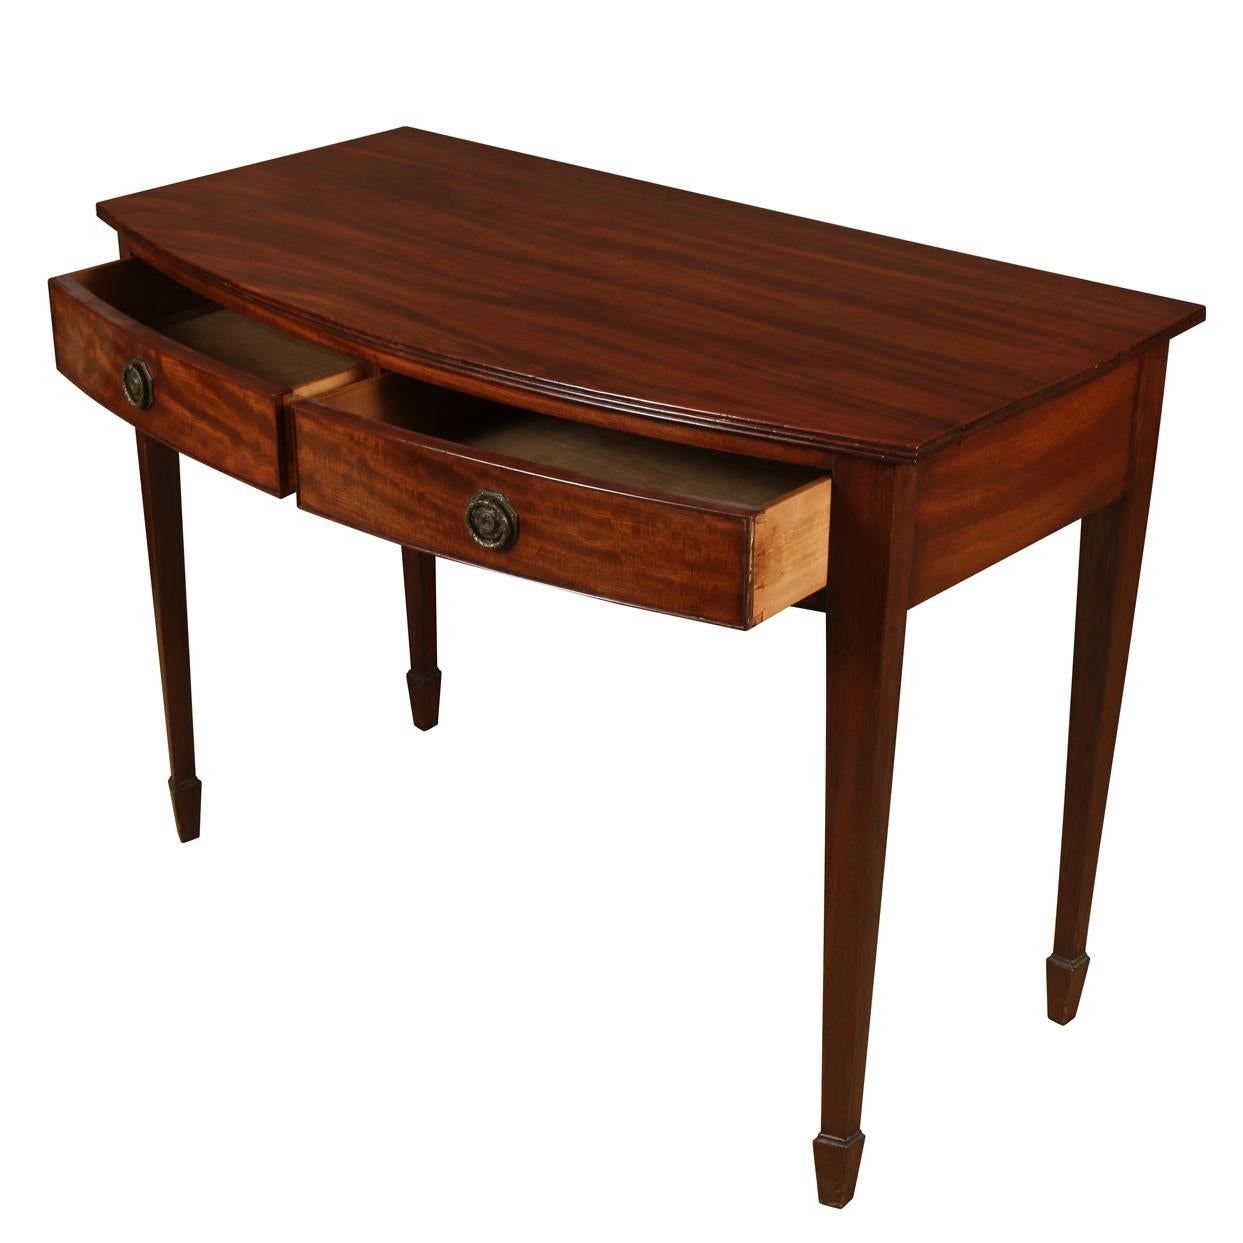 Hepplewhite style, mahogany antique server with two drawers, round hardware, curved front and tapered legs